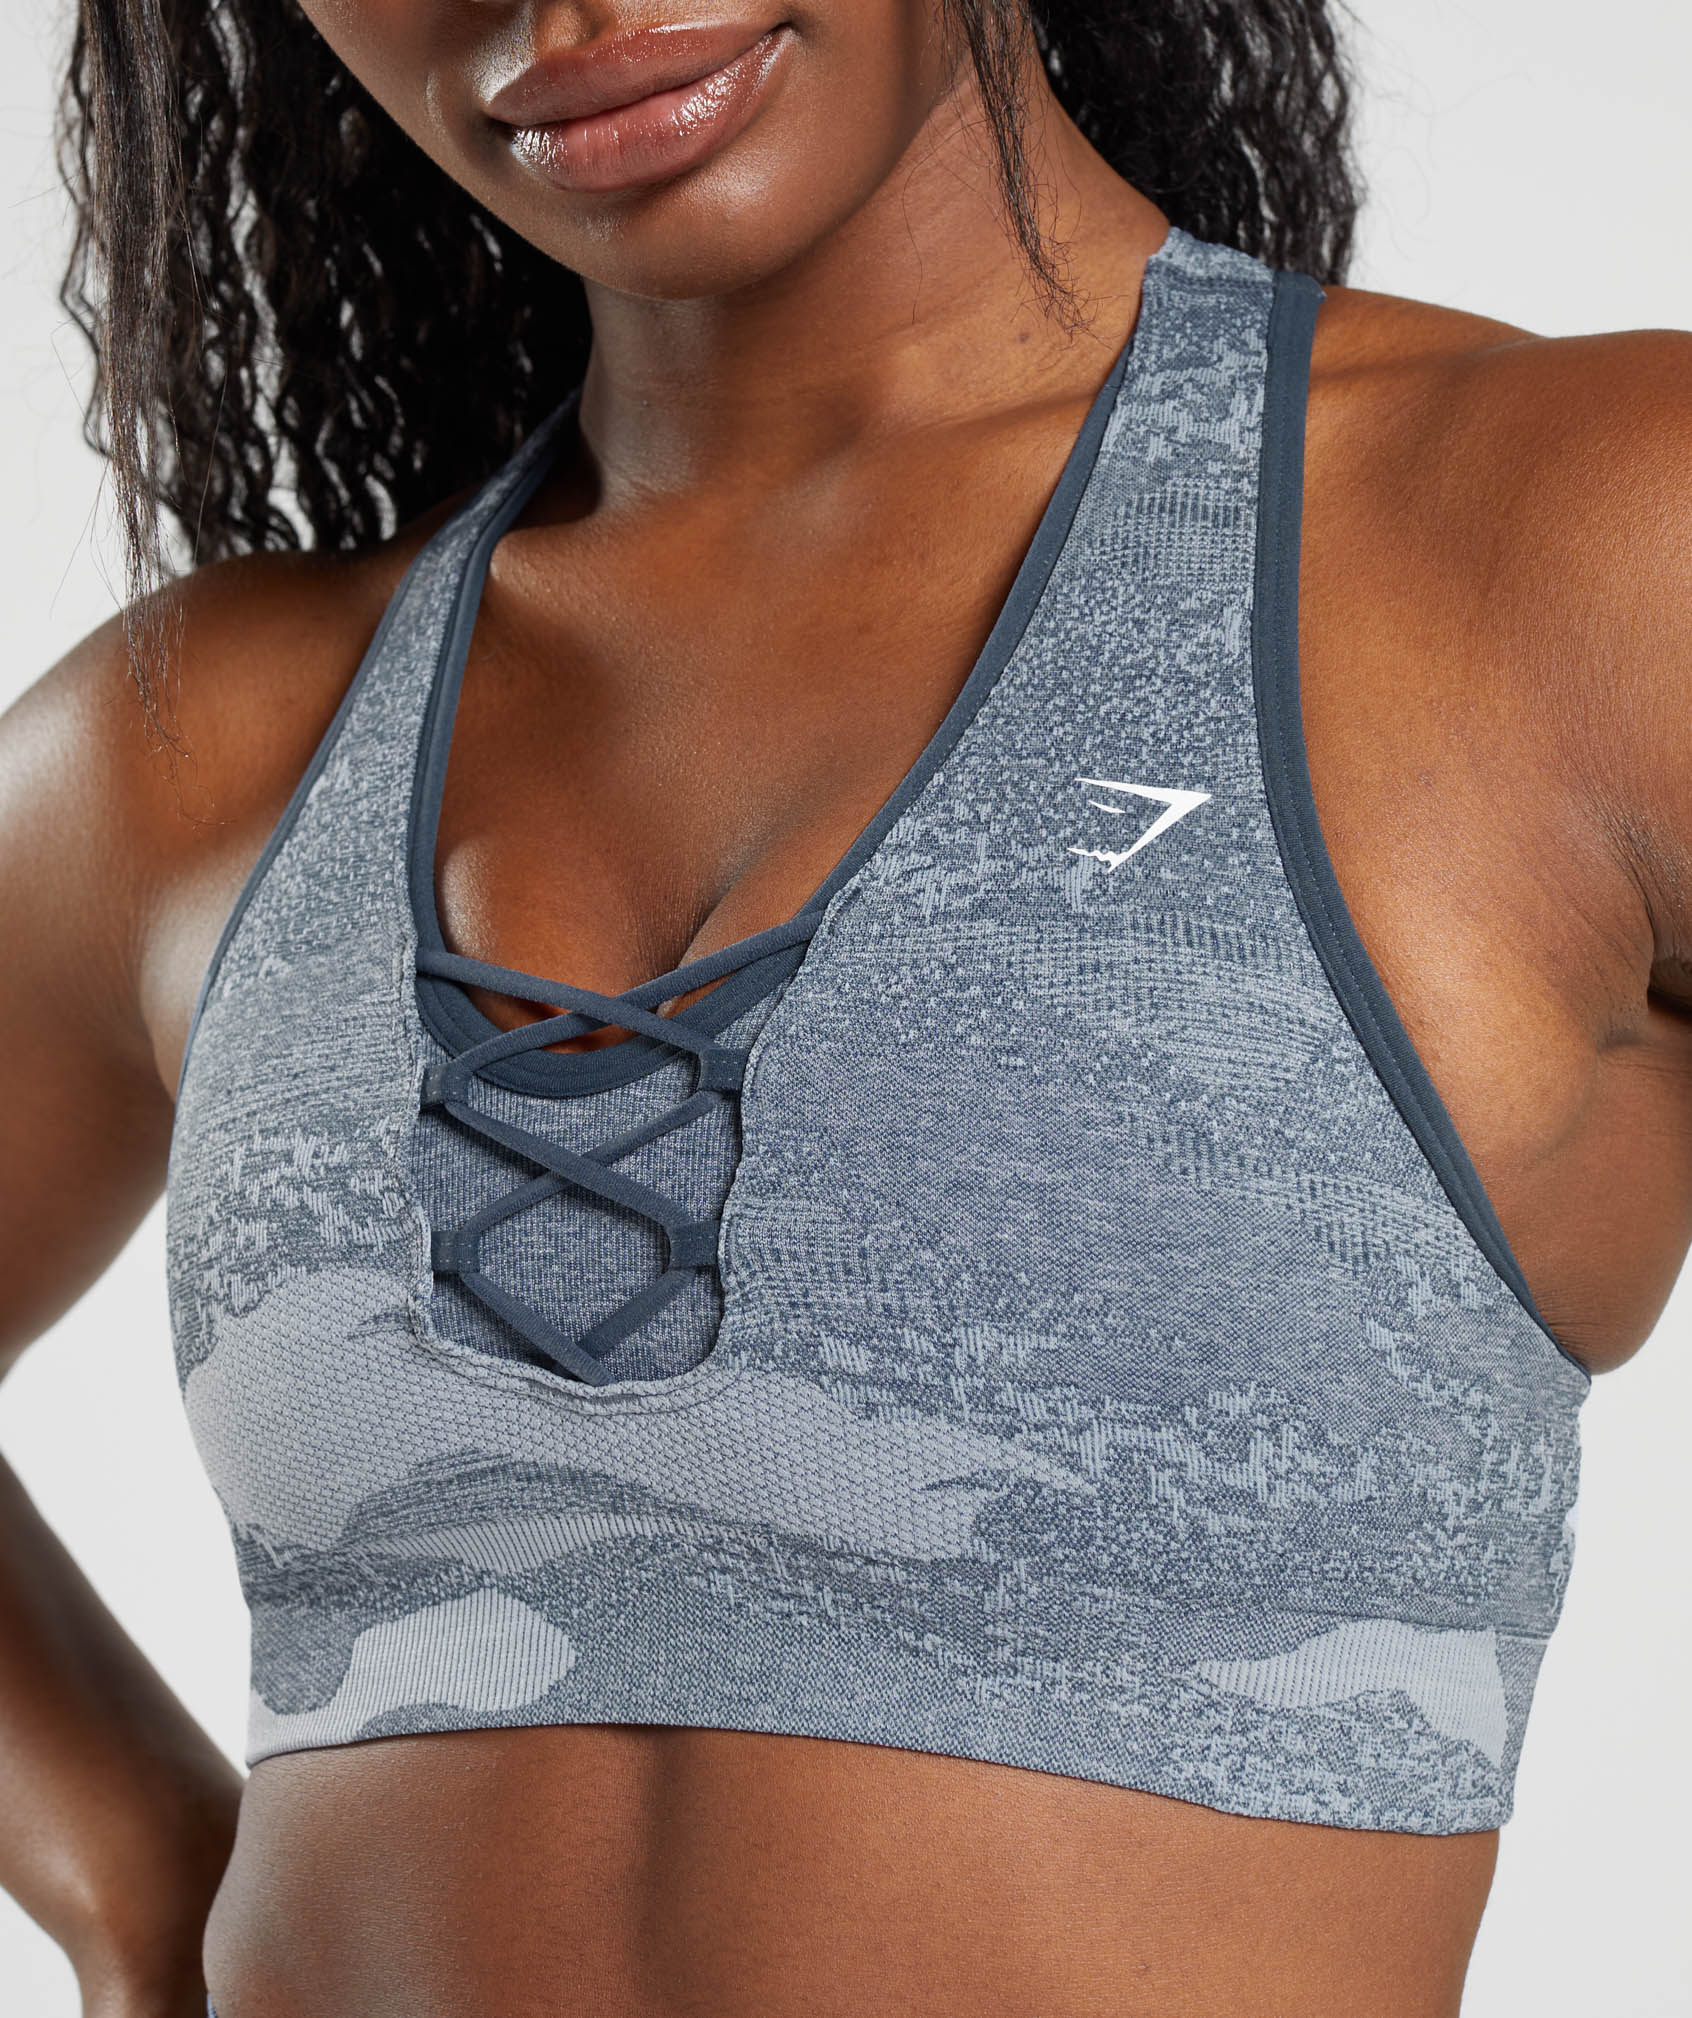 The Sports Bra Breakdown - A Sophisticated Notion